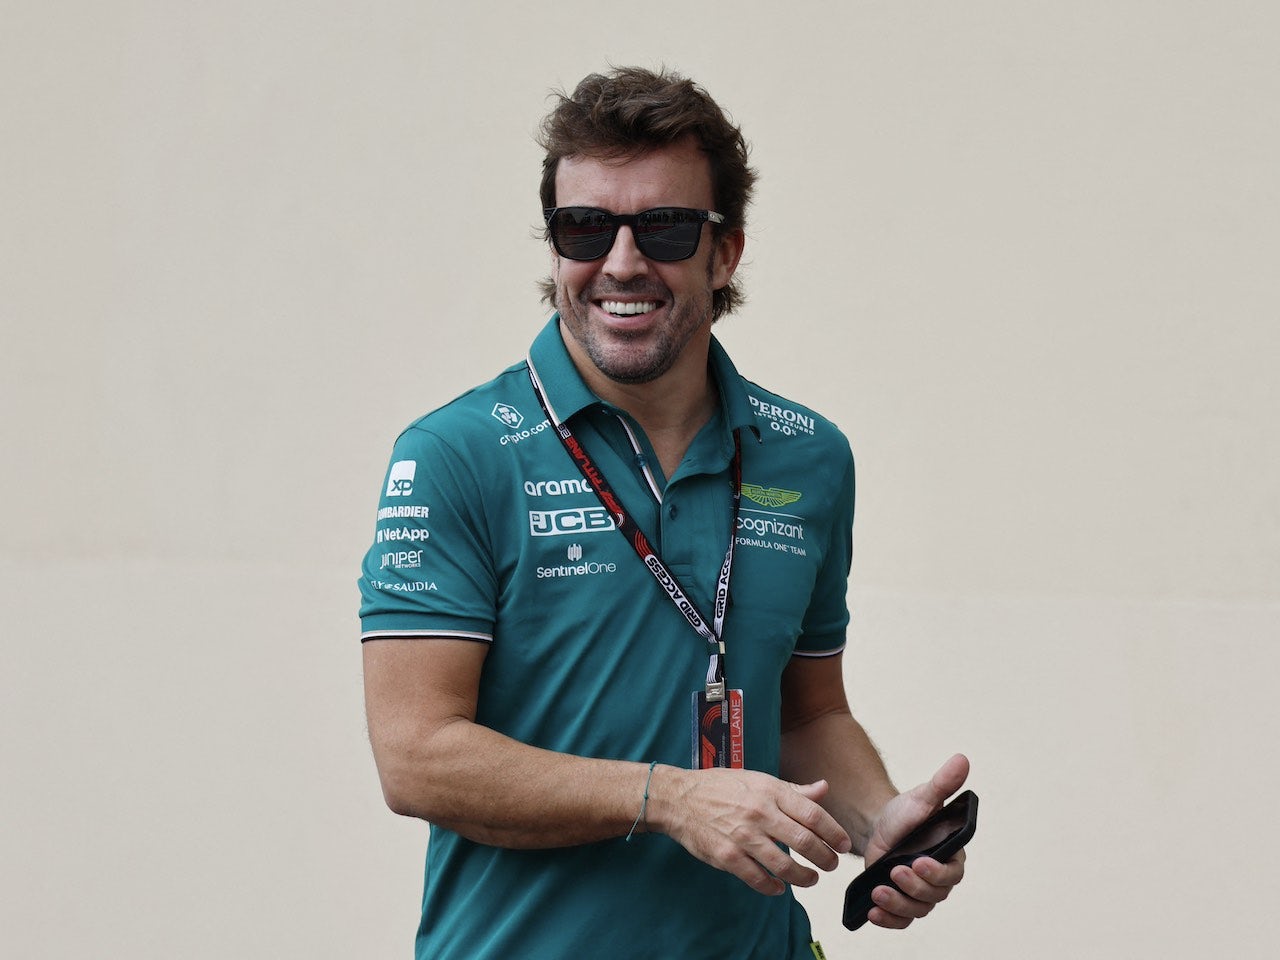 'Not exciting' F1 has triggered wave of scandals - Alonso